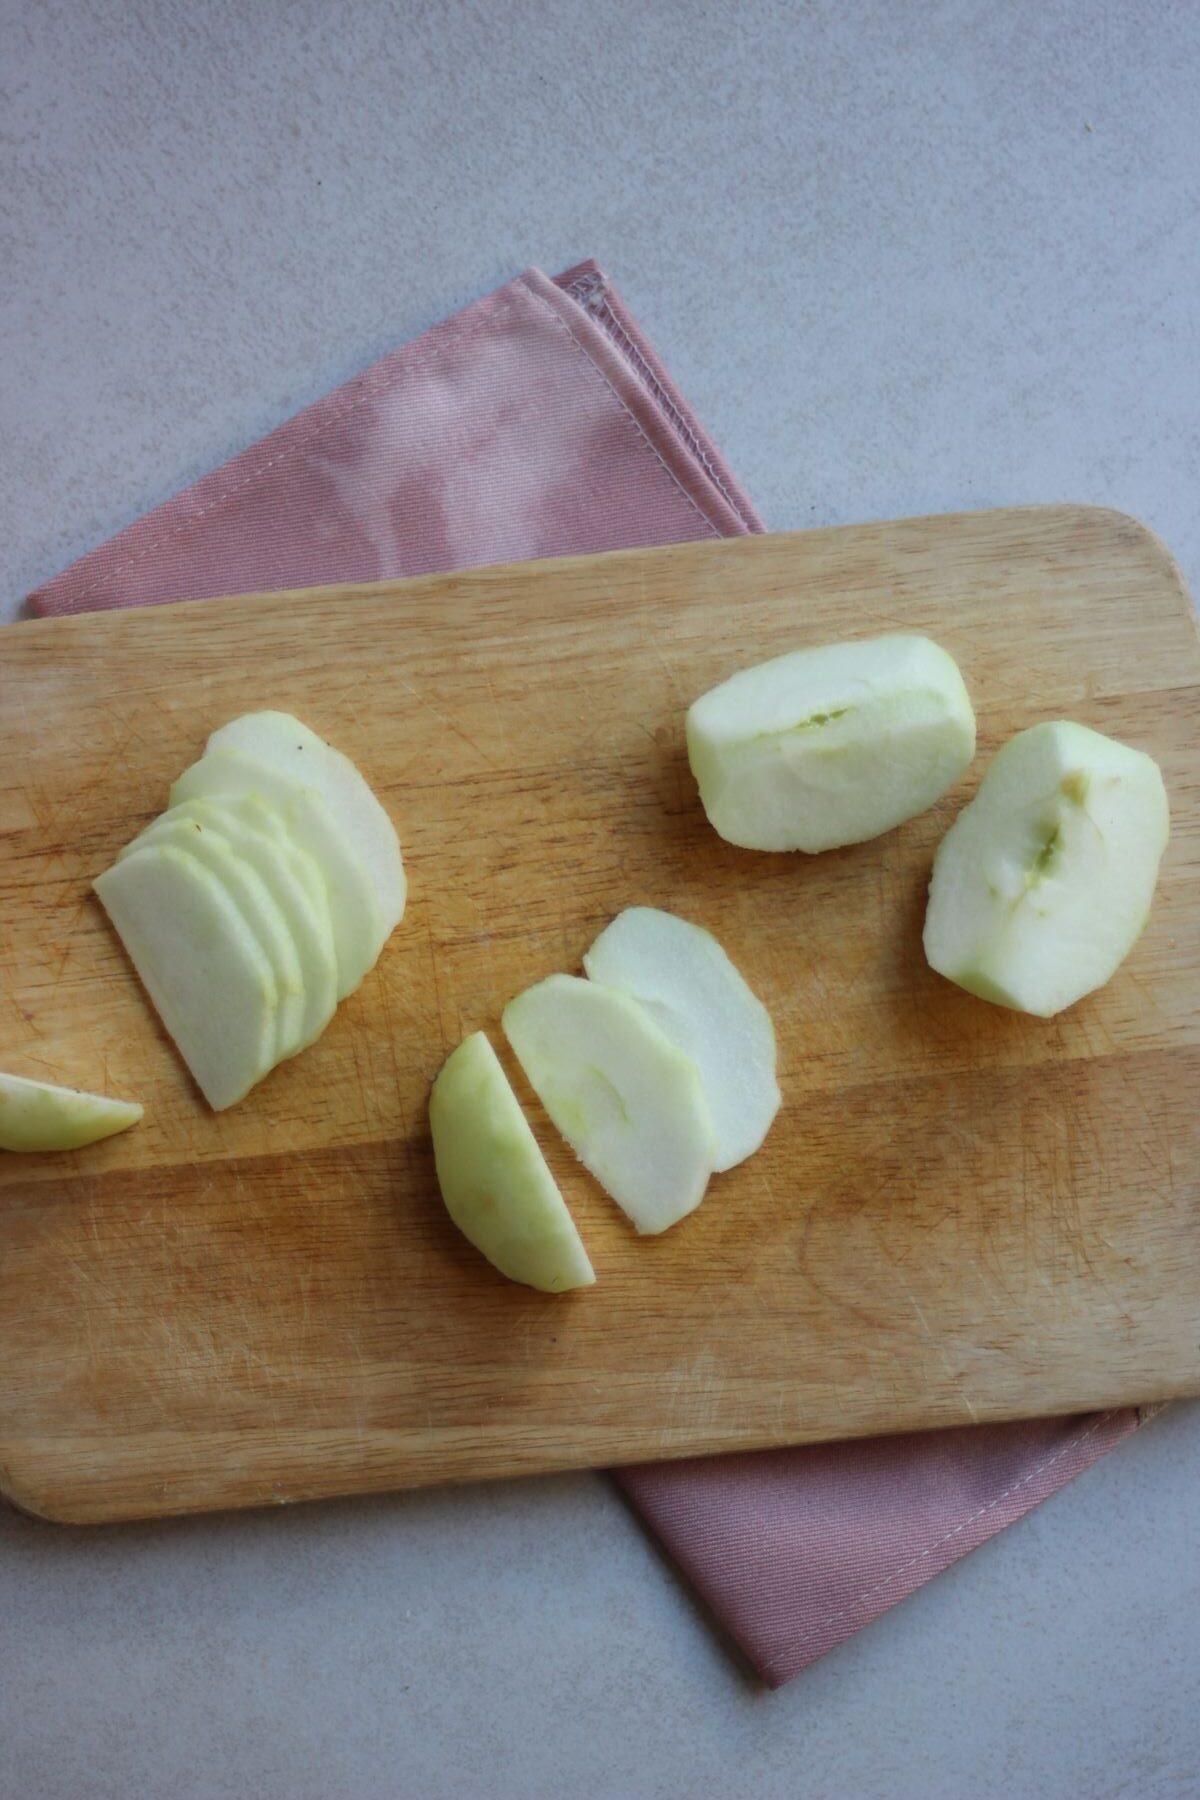 Slices apples on a wooden board.